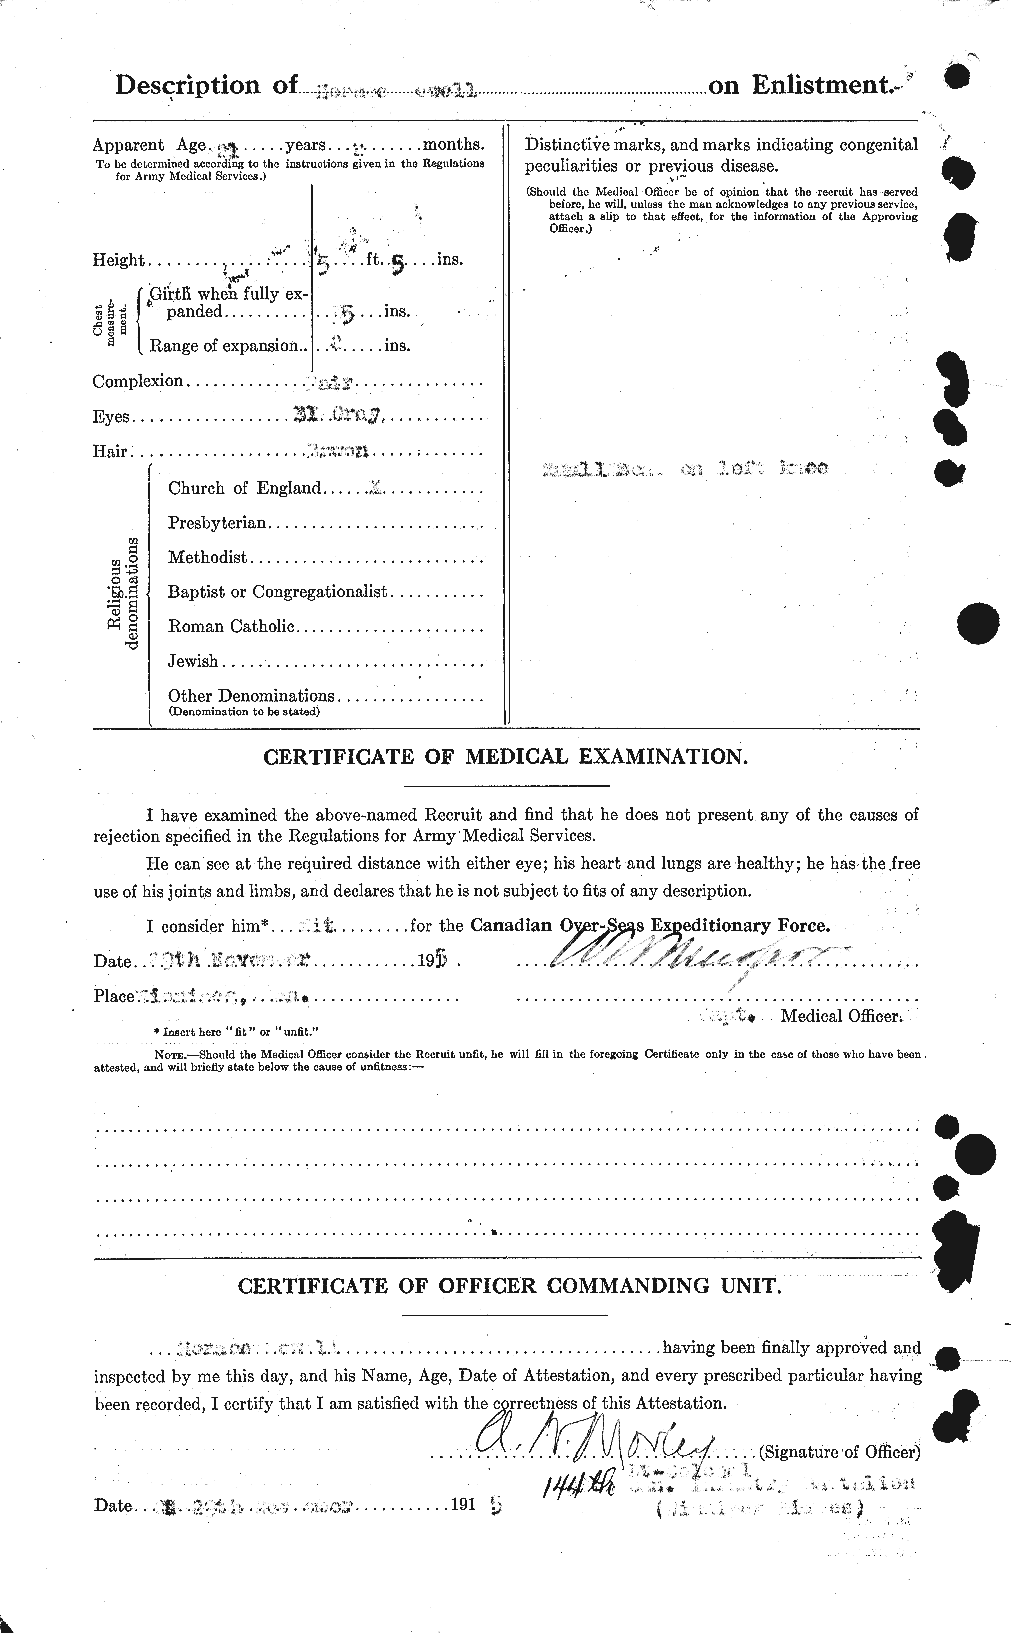 Personnel Records of the First World War - CEF 089737b